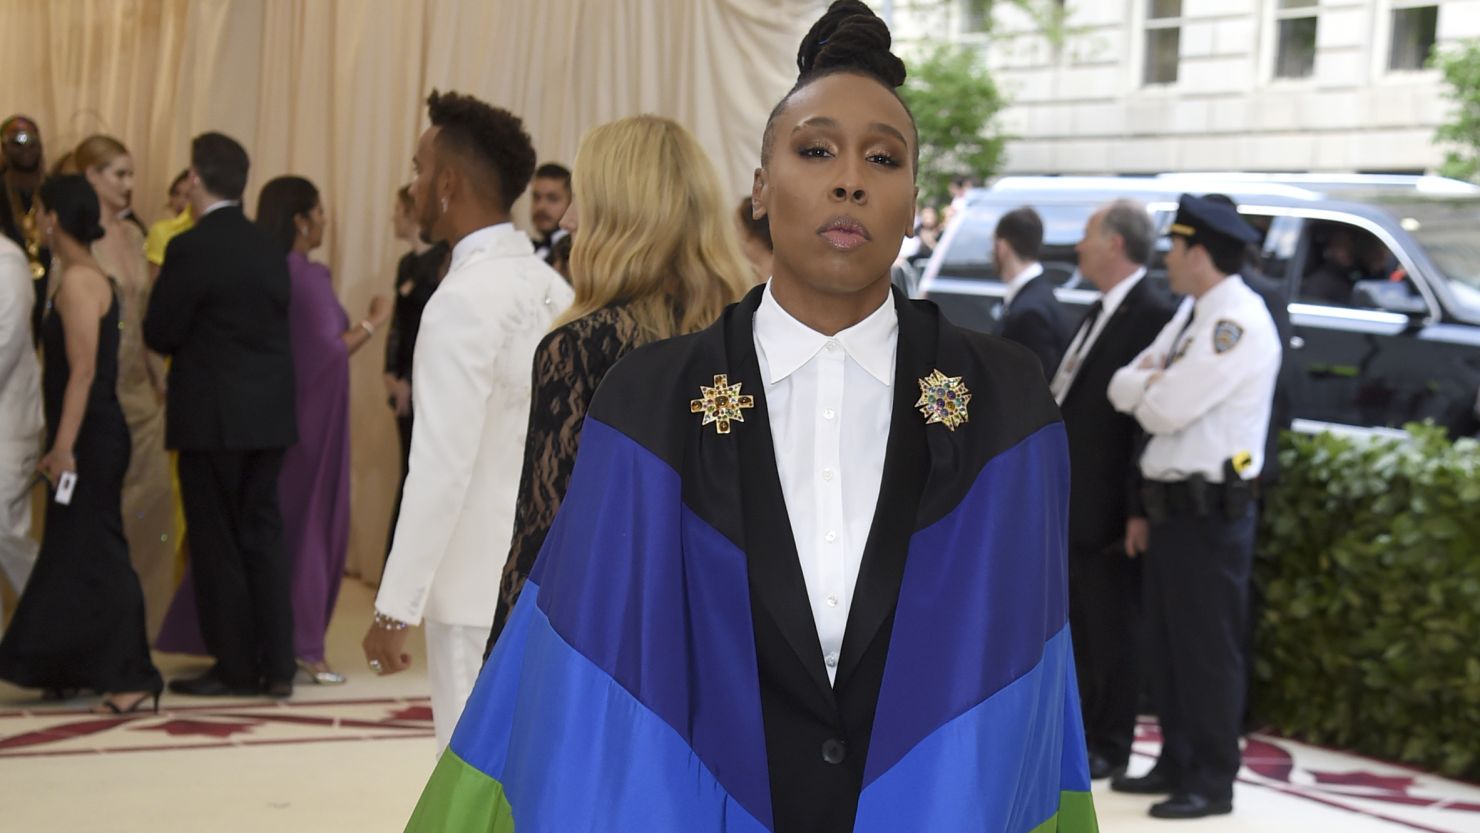 Lena Waithe attends The Metropolitan Museum of Art's Costume Institute benefit gala celebrating the opening of the Heavenly Bodies: Fashion and the Catholic Imagination exhibition on Monday, May 7, 2018, in New York. (Photo by Evan Agostini/Invision/AP)